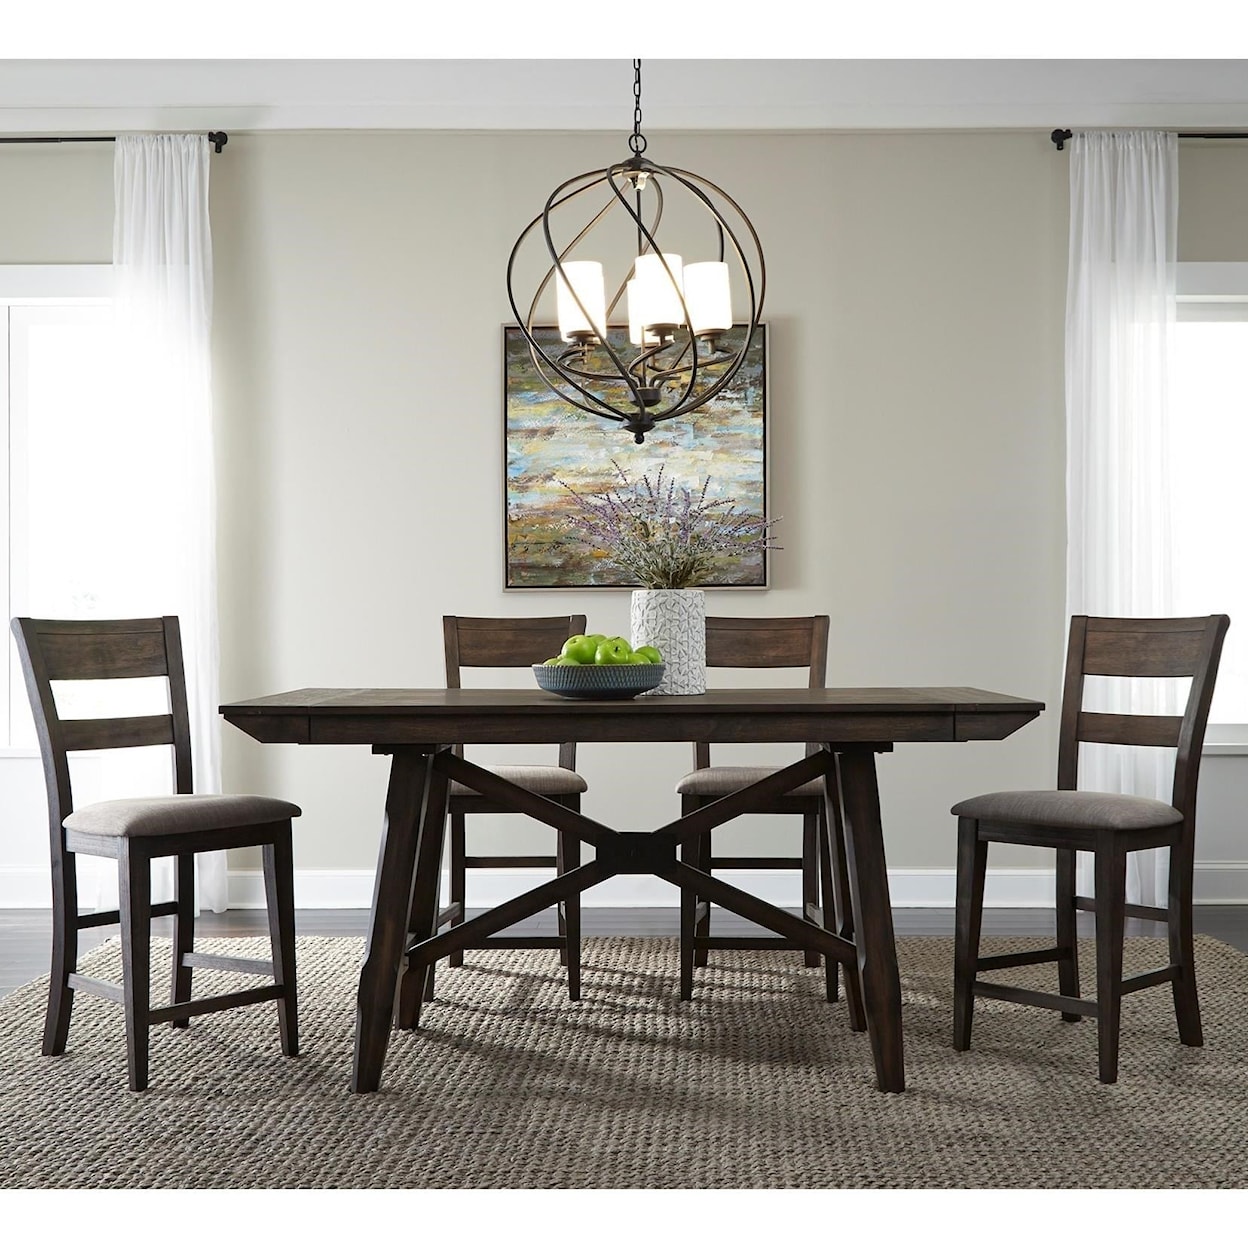 Libby Double Bridge 5-Piece Counter-Height Gathering Table Set